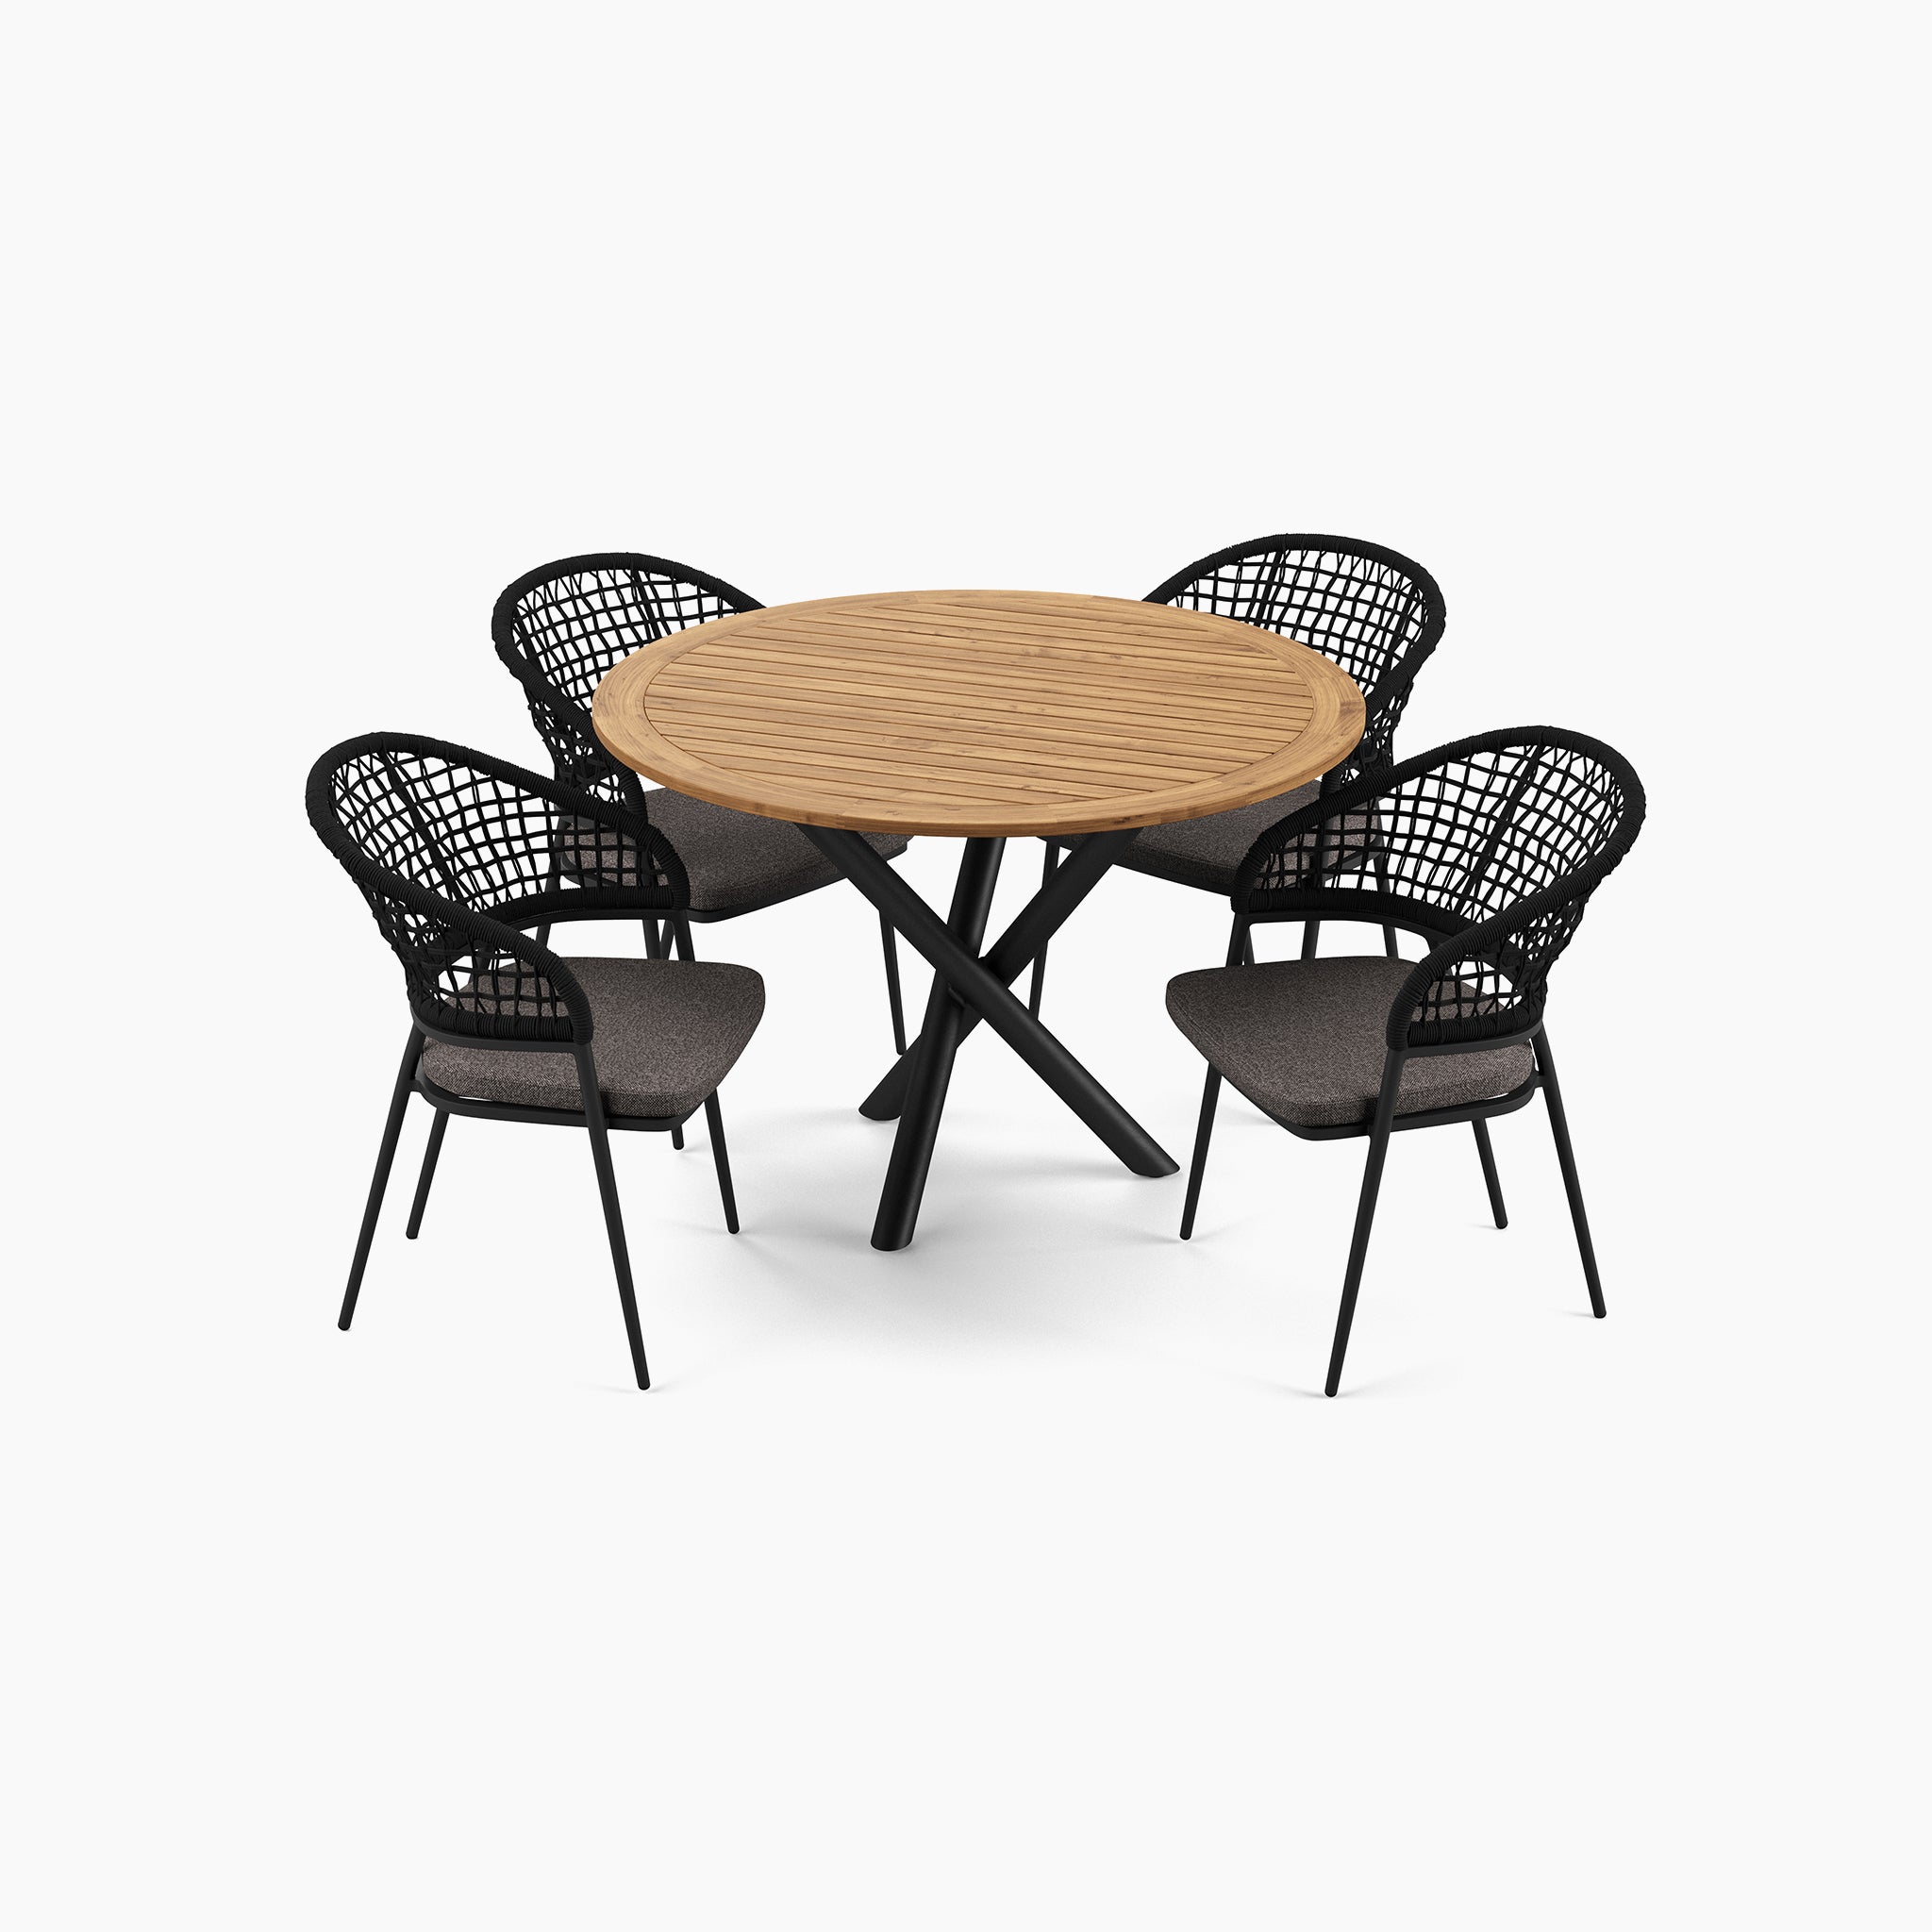 Kalama 4 Seat Round Dining Set with Teak Table in Charcoal